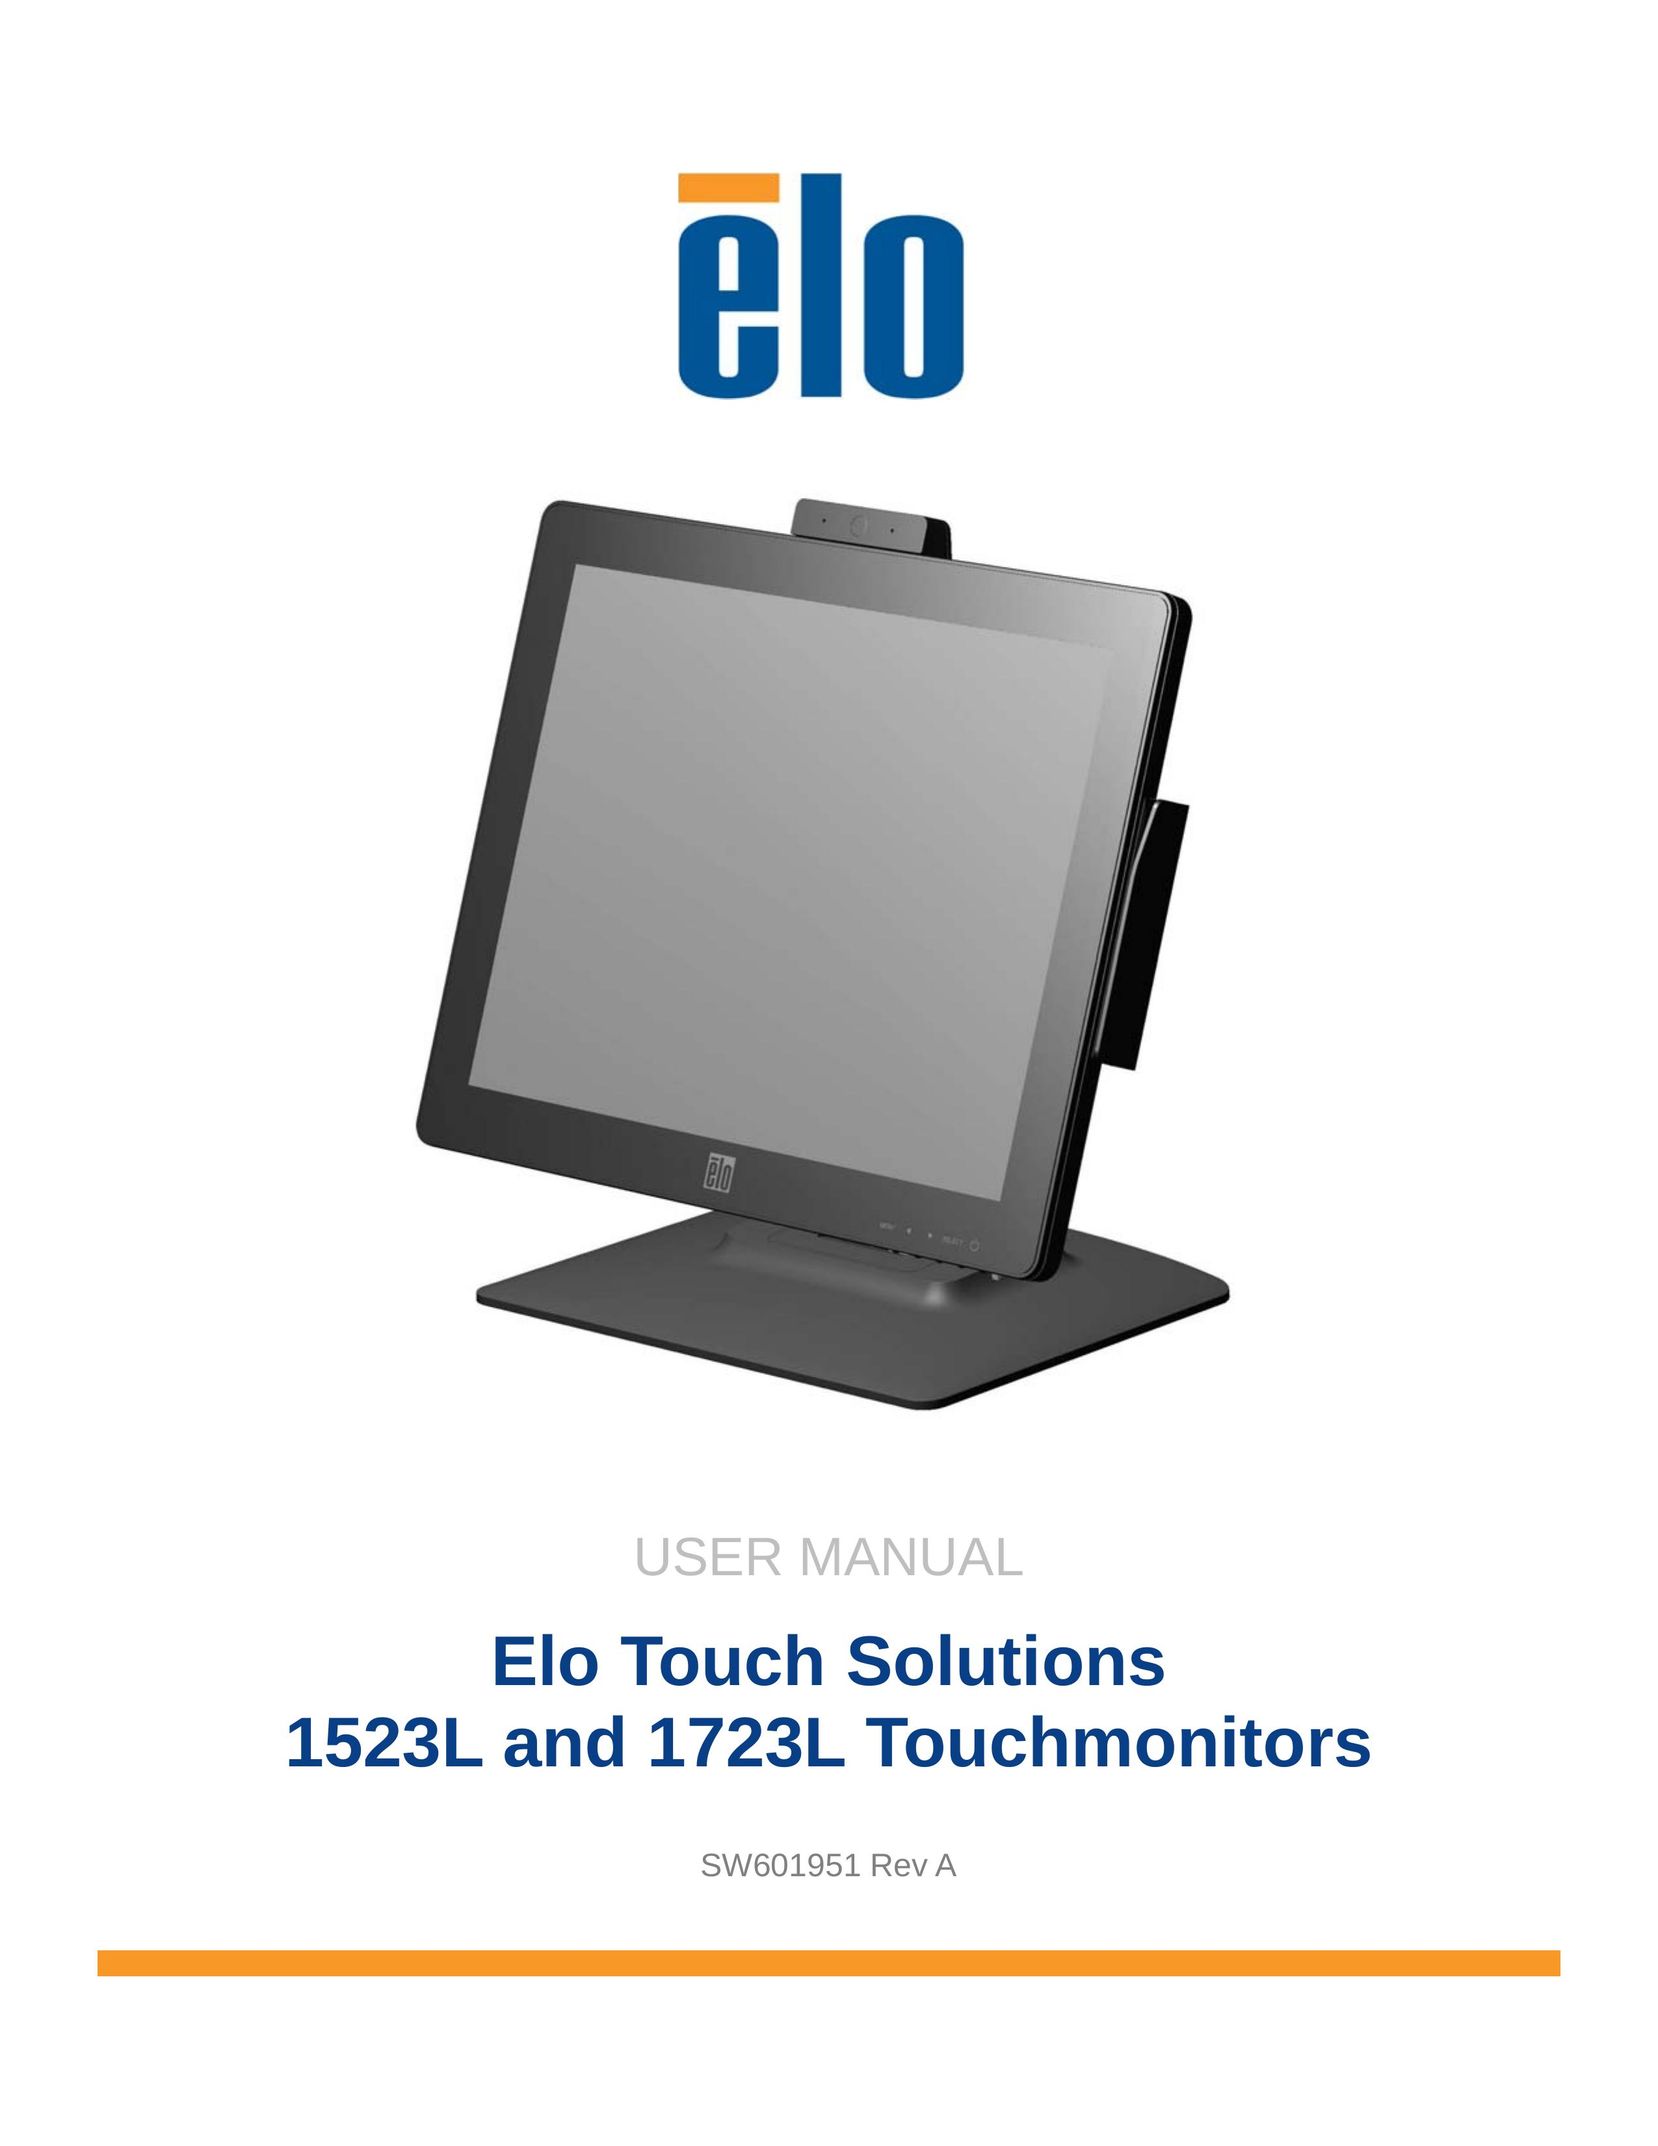 Elo TouchSystems 1723L Car Video System User Manual